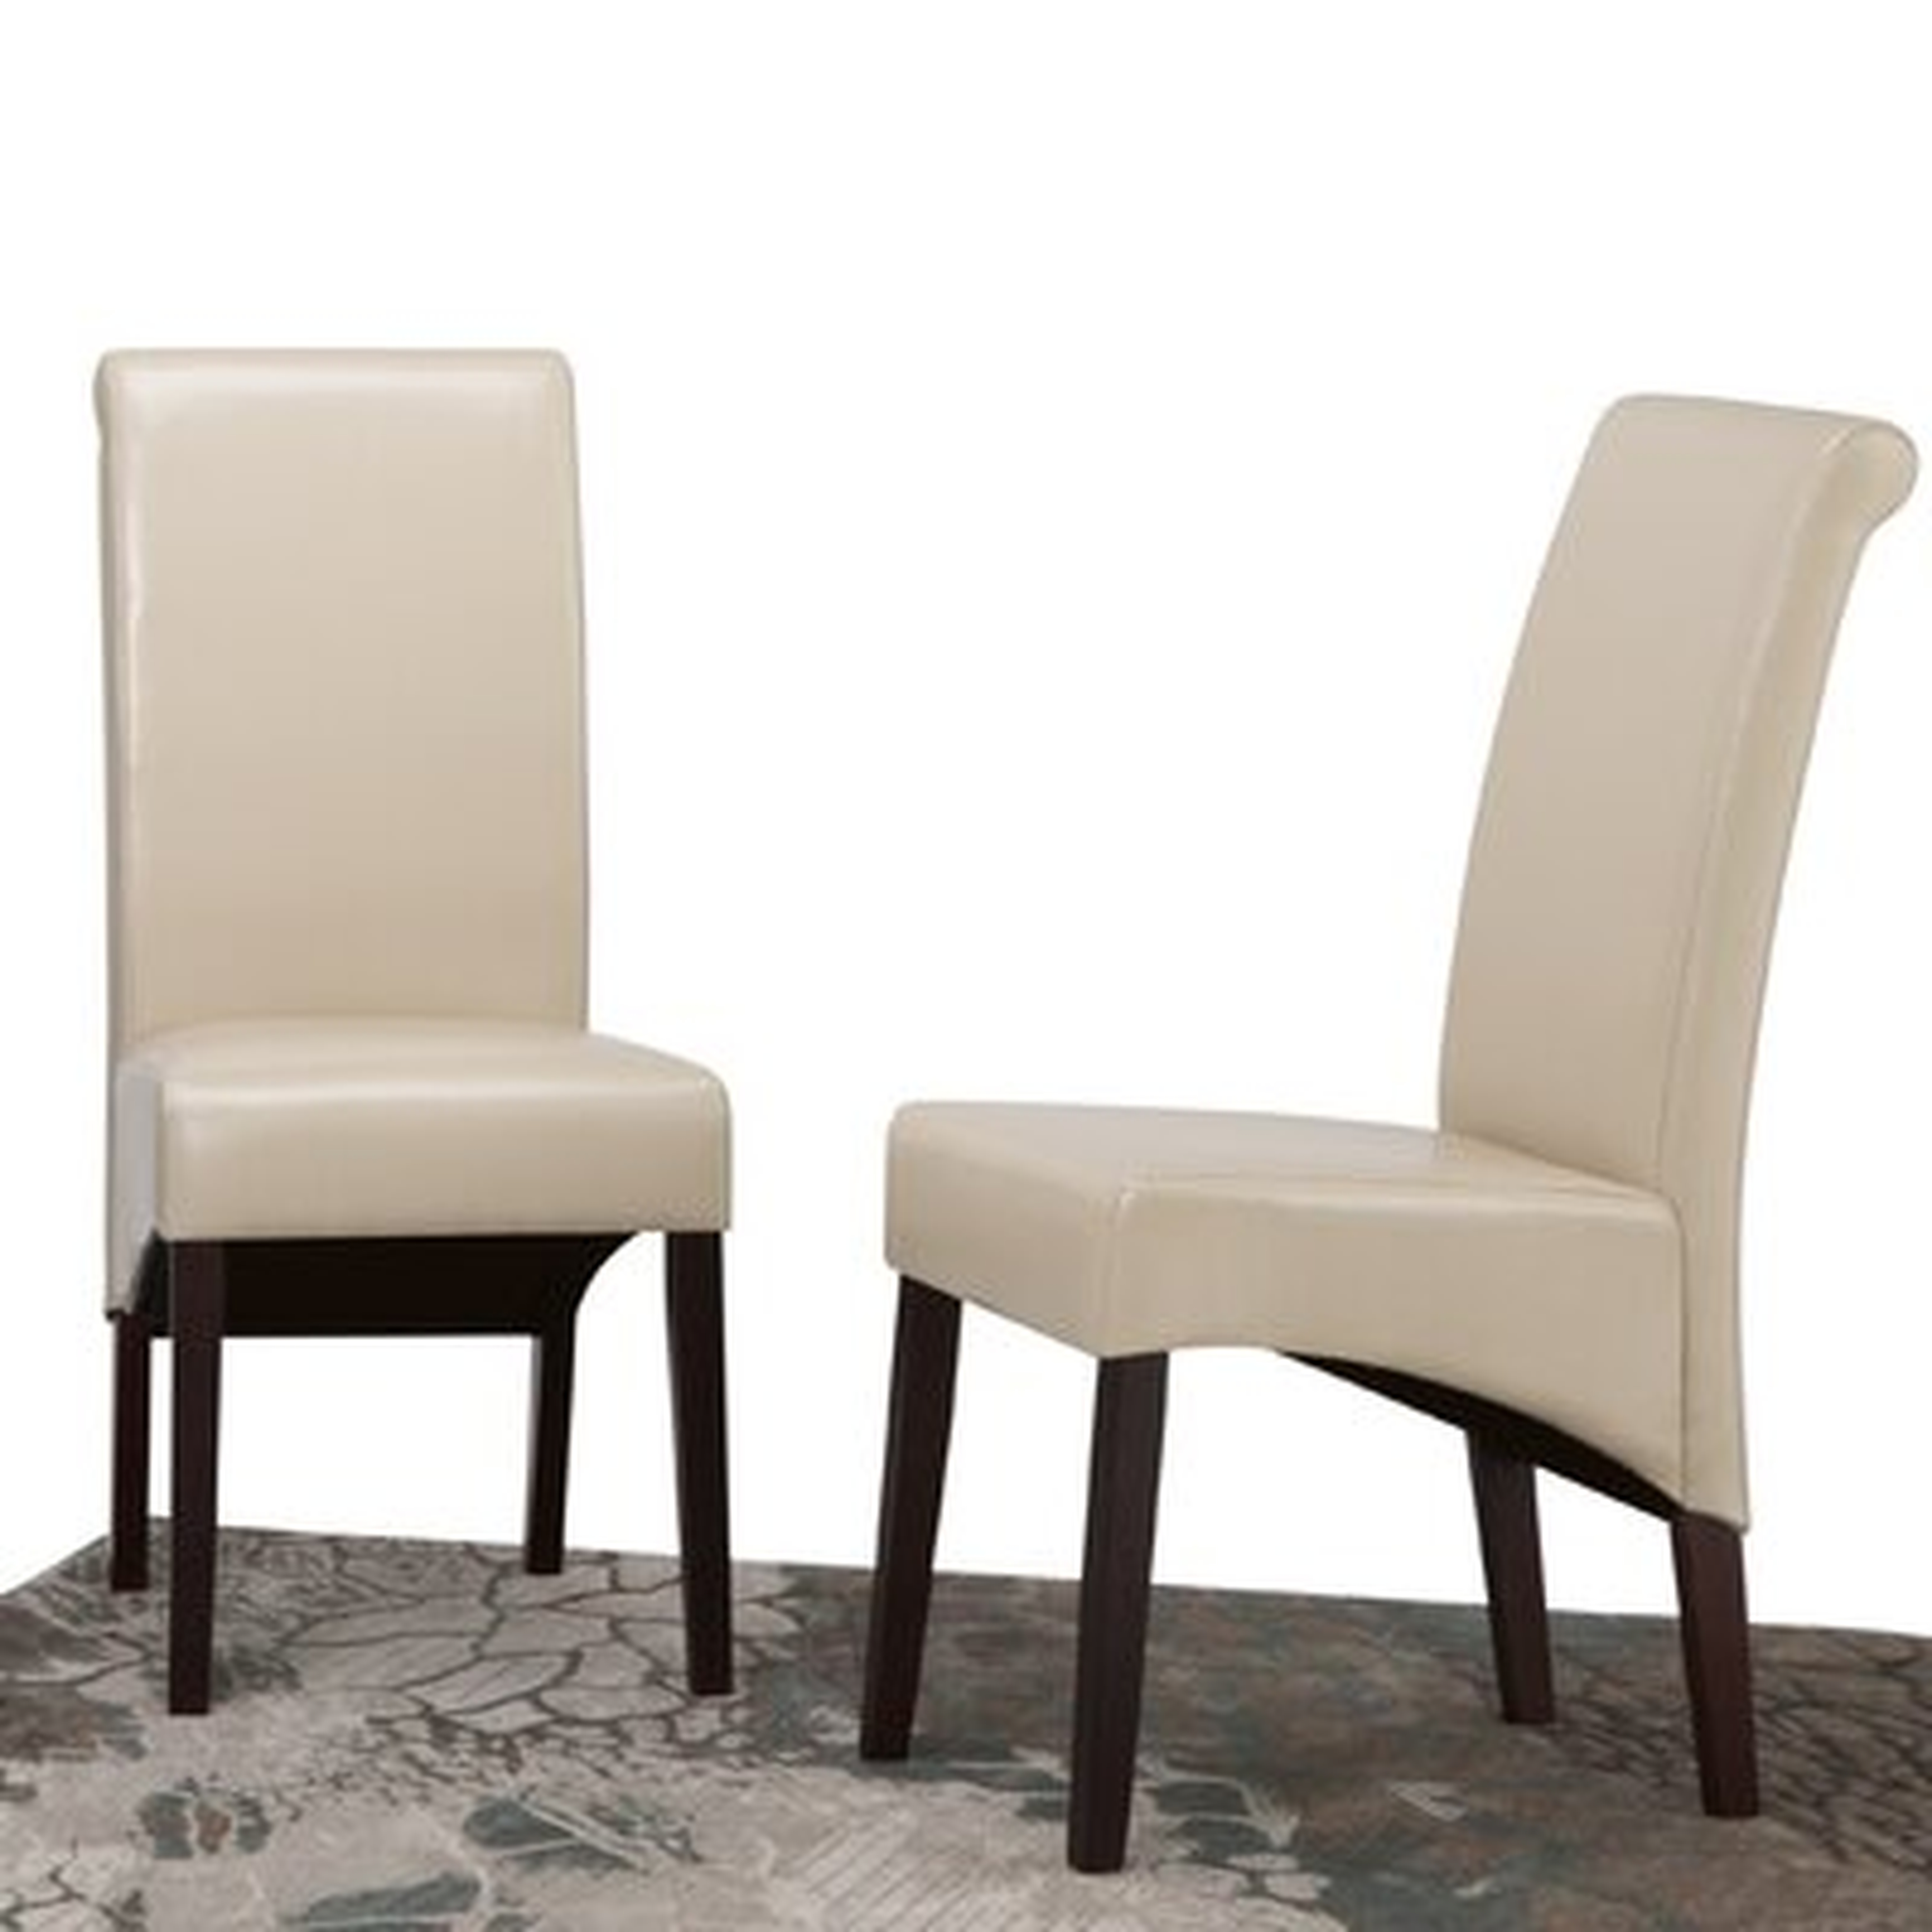 Adachi Deluxe Upholstered Dining Chair - Wayfair